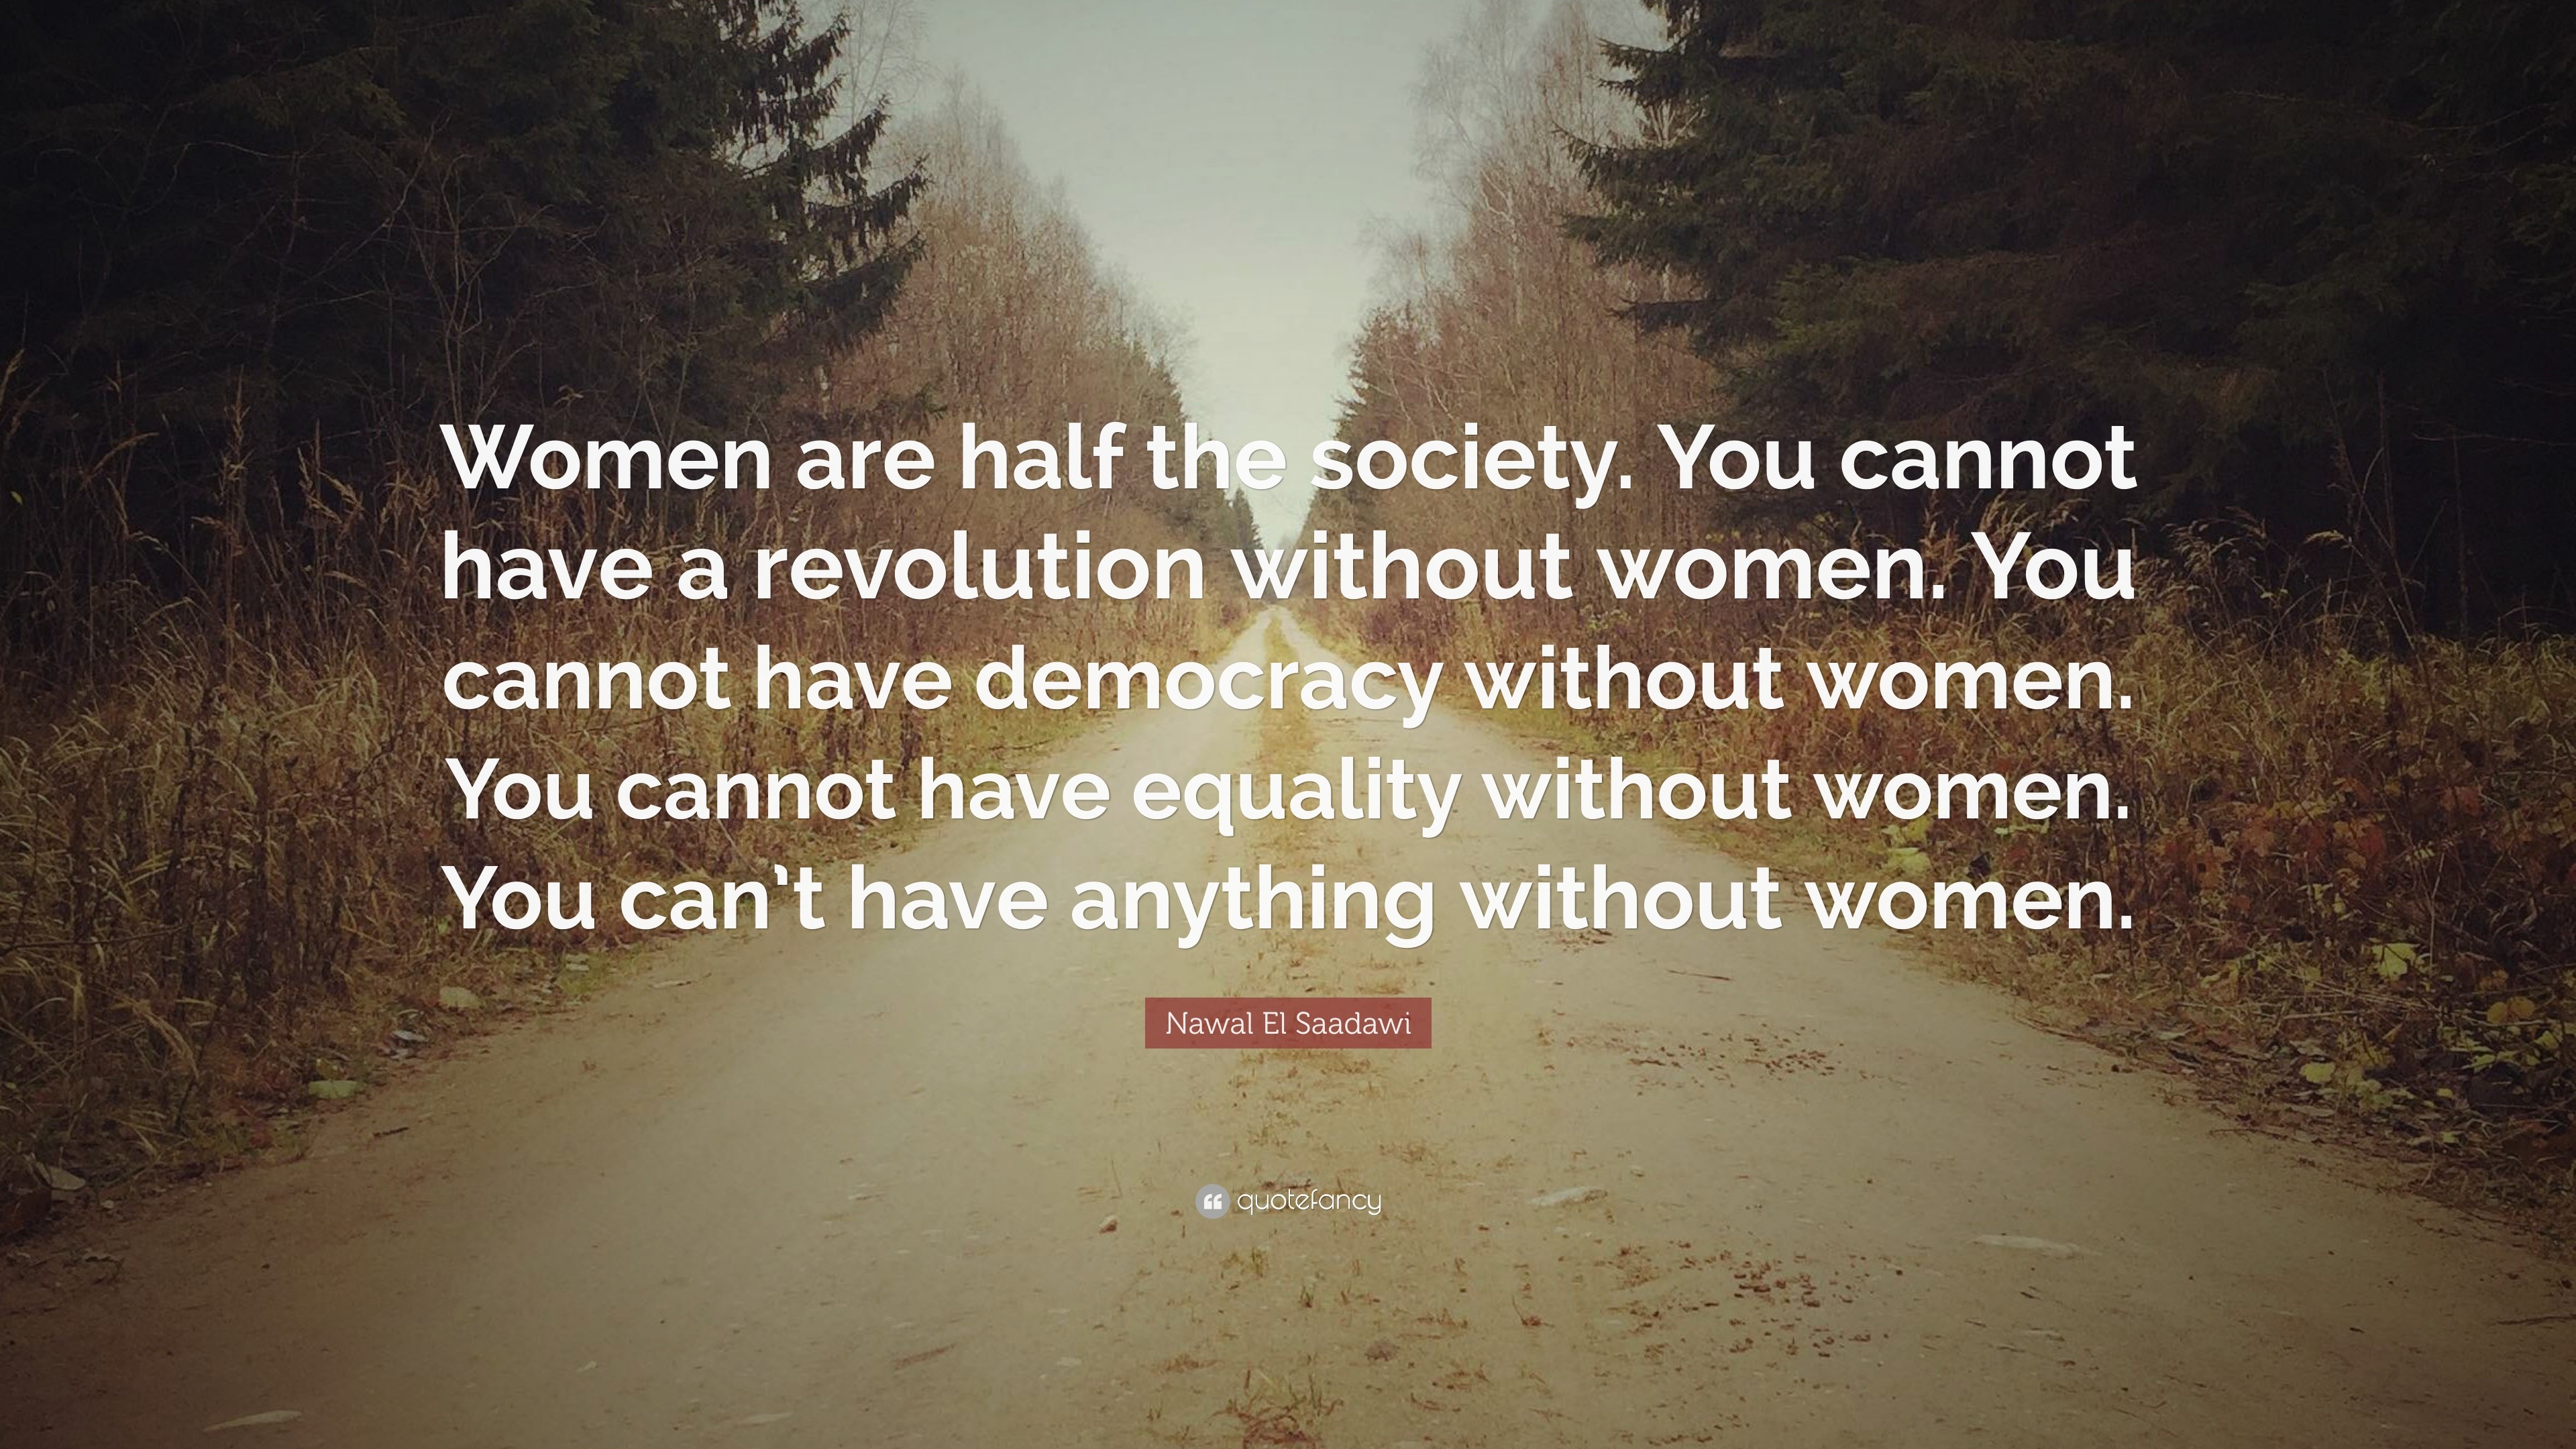 Nawal El Saadawi Quote: "Women are half the society. You ...